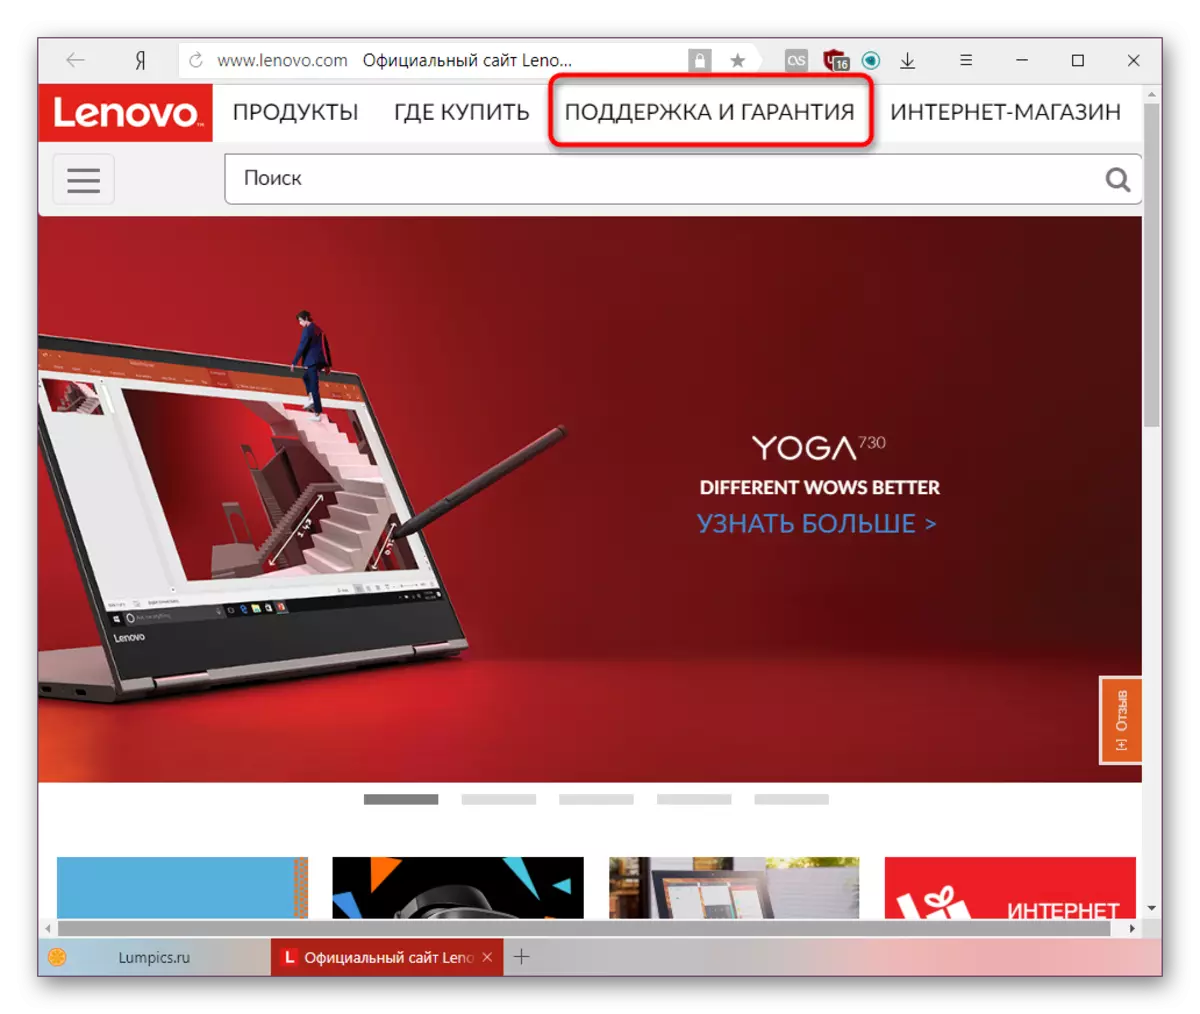 Support section on the official site Lenovo